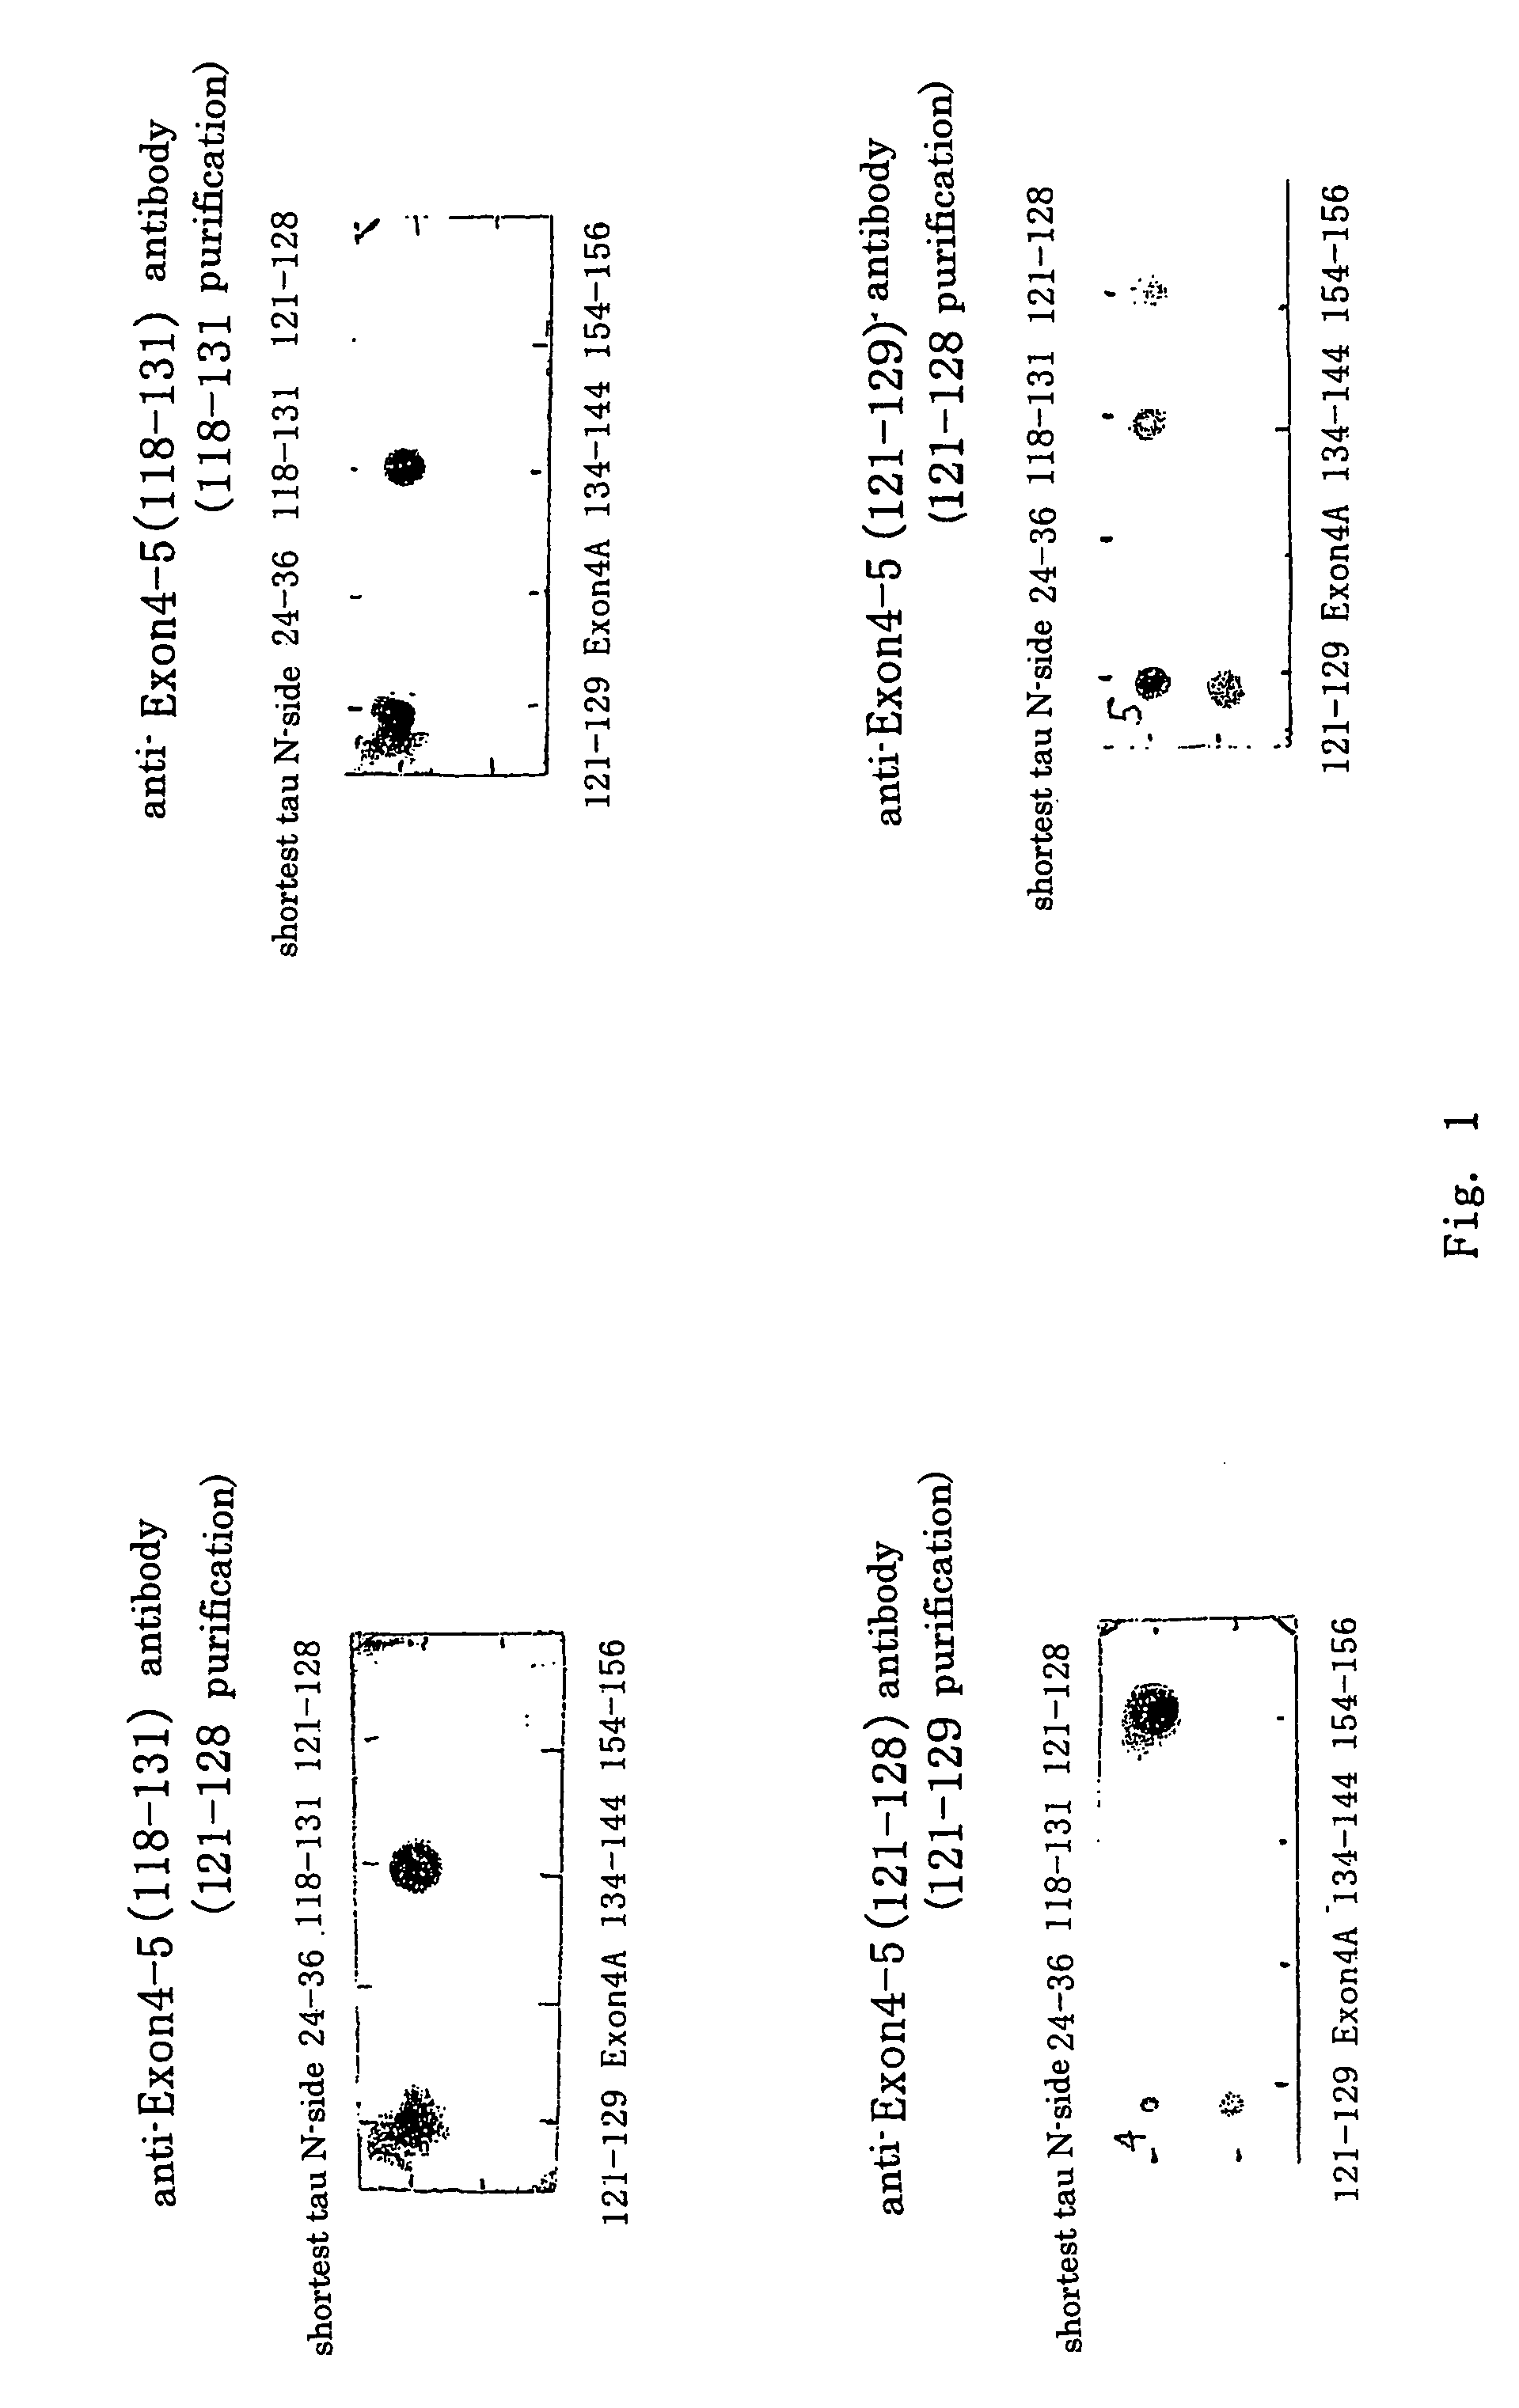 Antibody specific to central nervous system tau protein